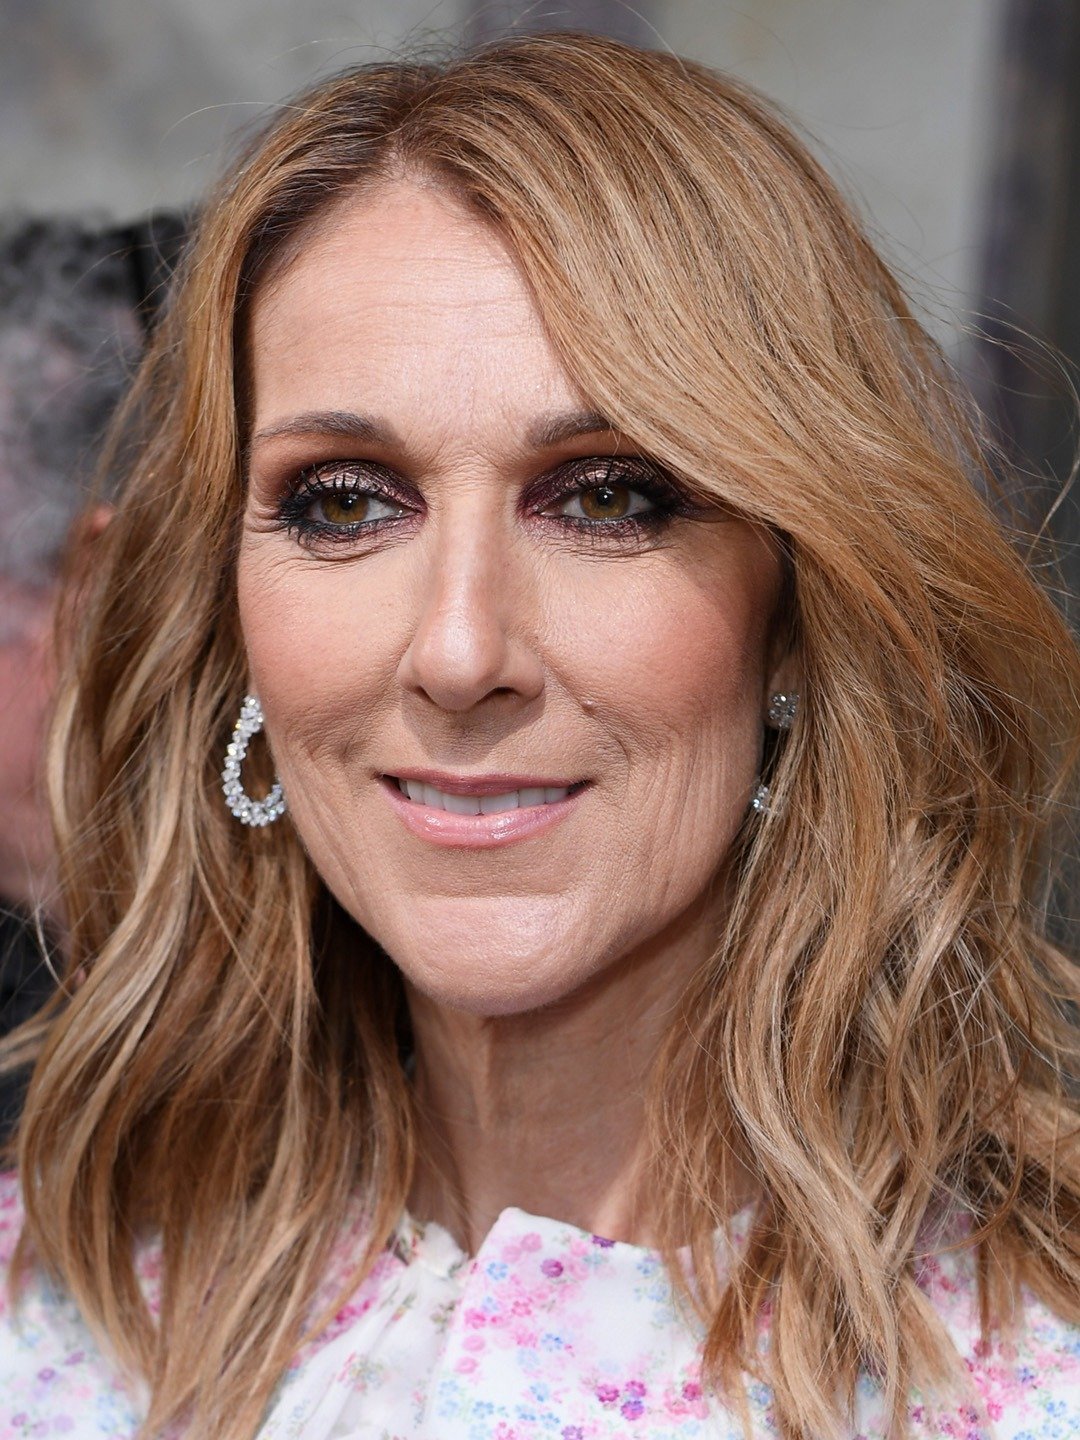 How tall is Celine Dion?